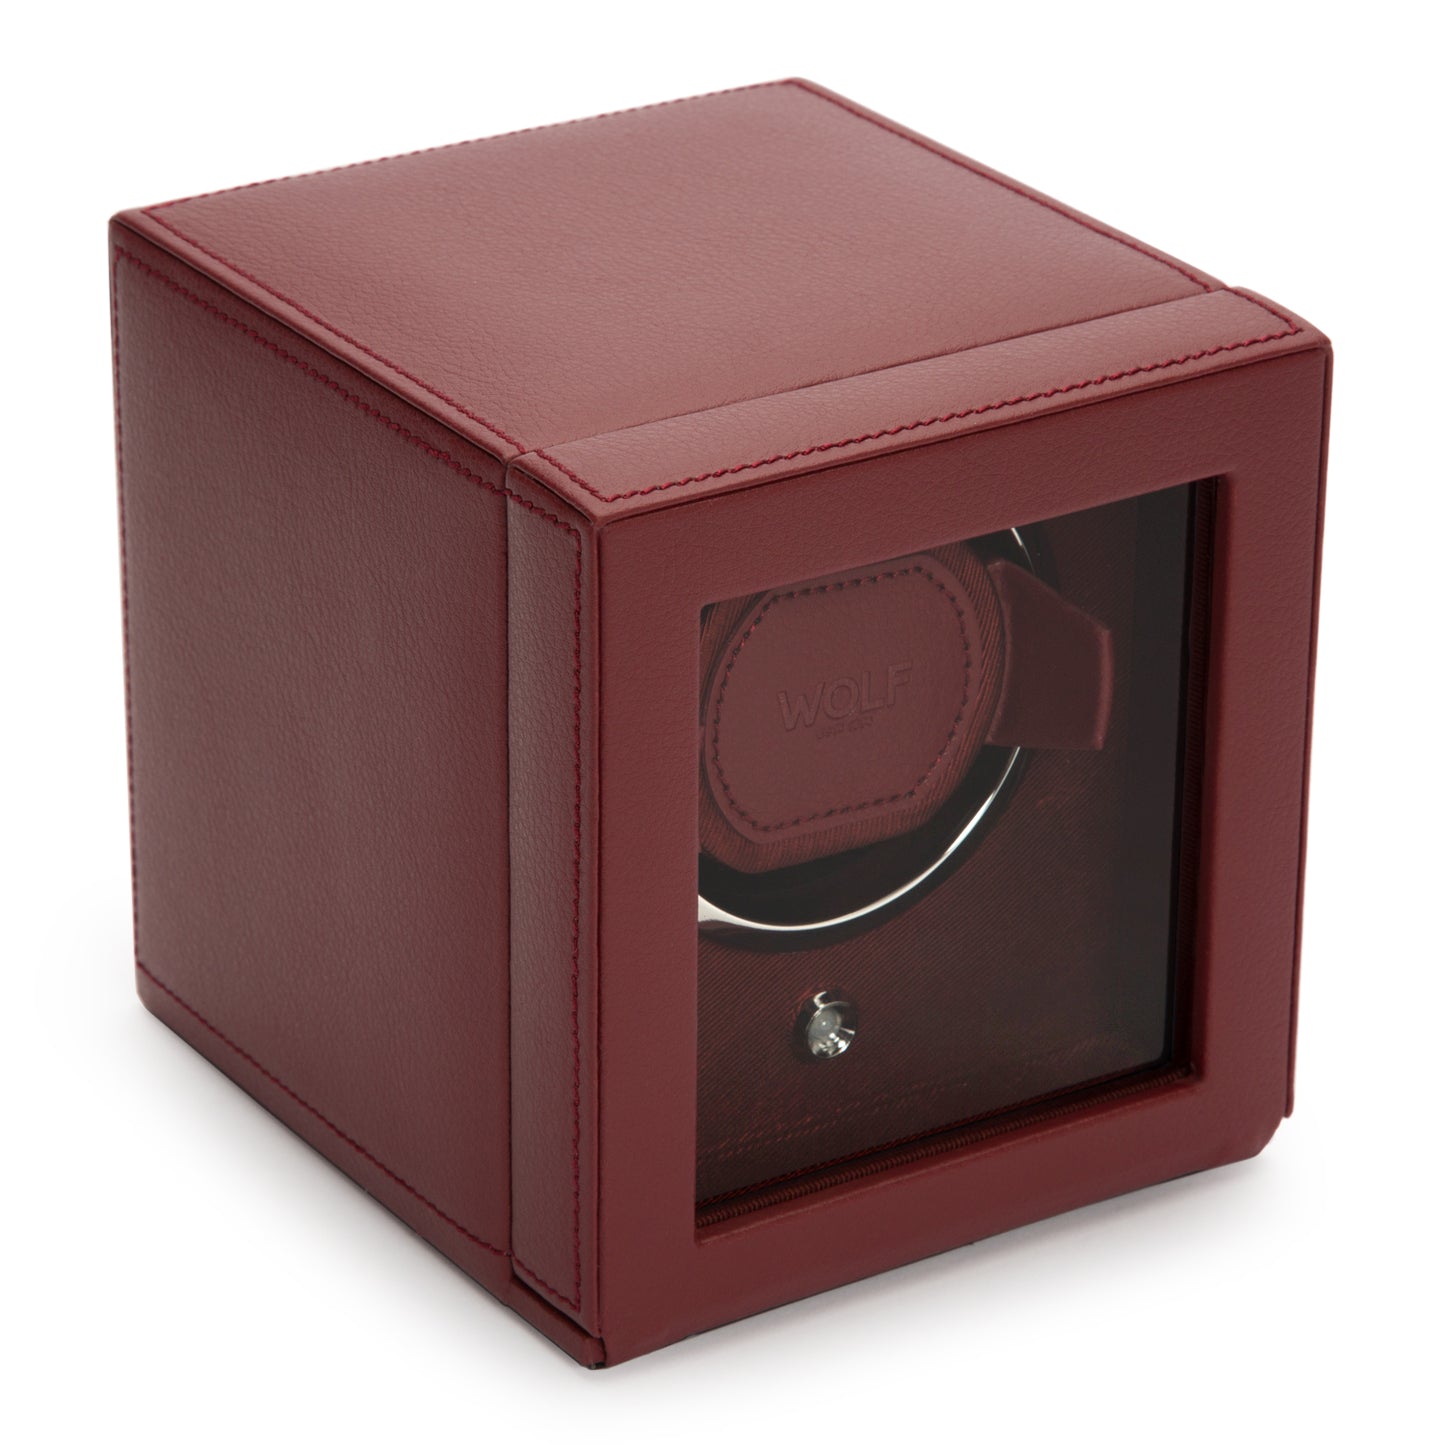 Cub Single Watch Winder with Cover, Bordeaux